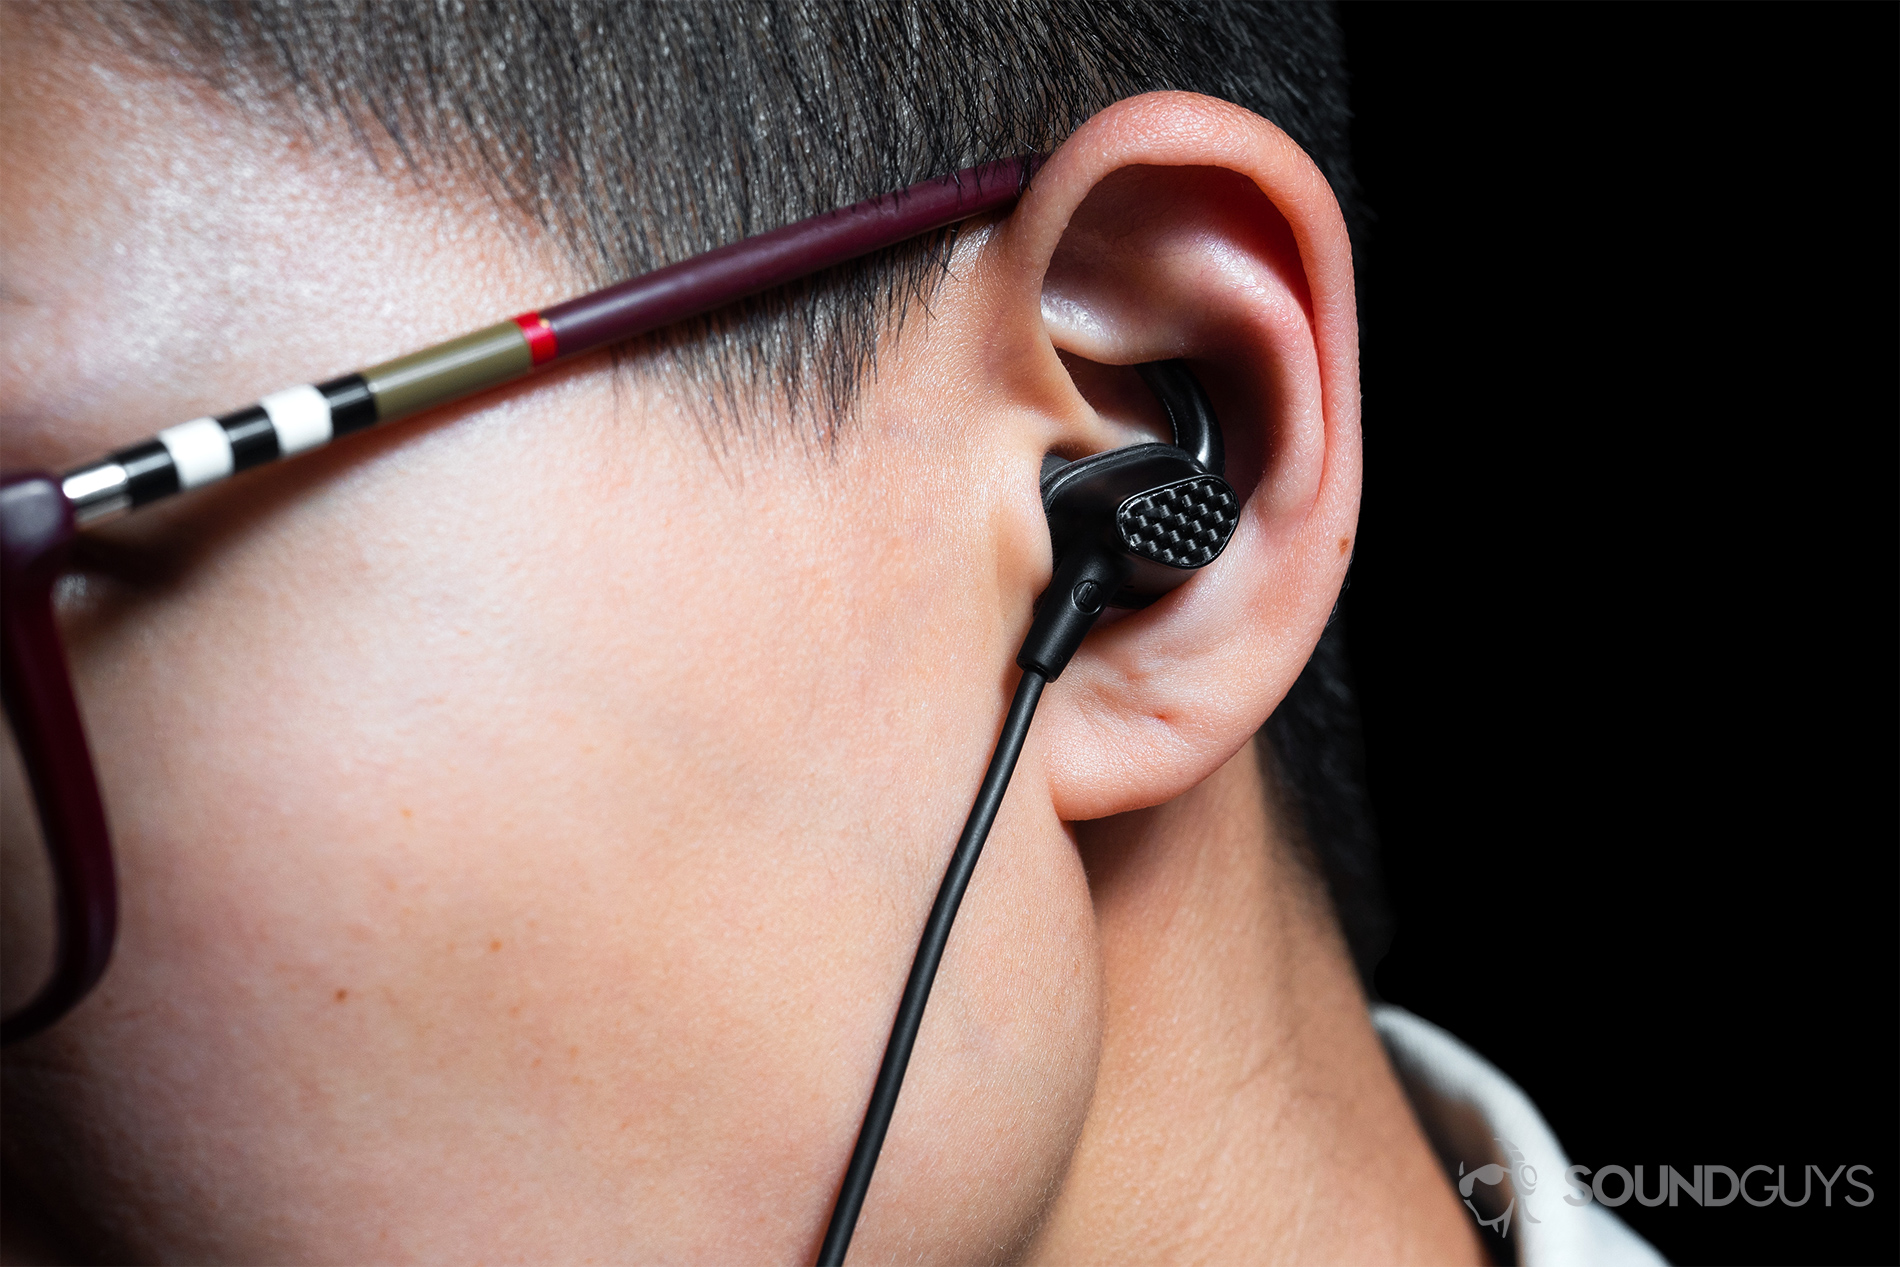 A woman wearing the earbuds with a close-up of the ear to depict the fit.